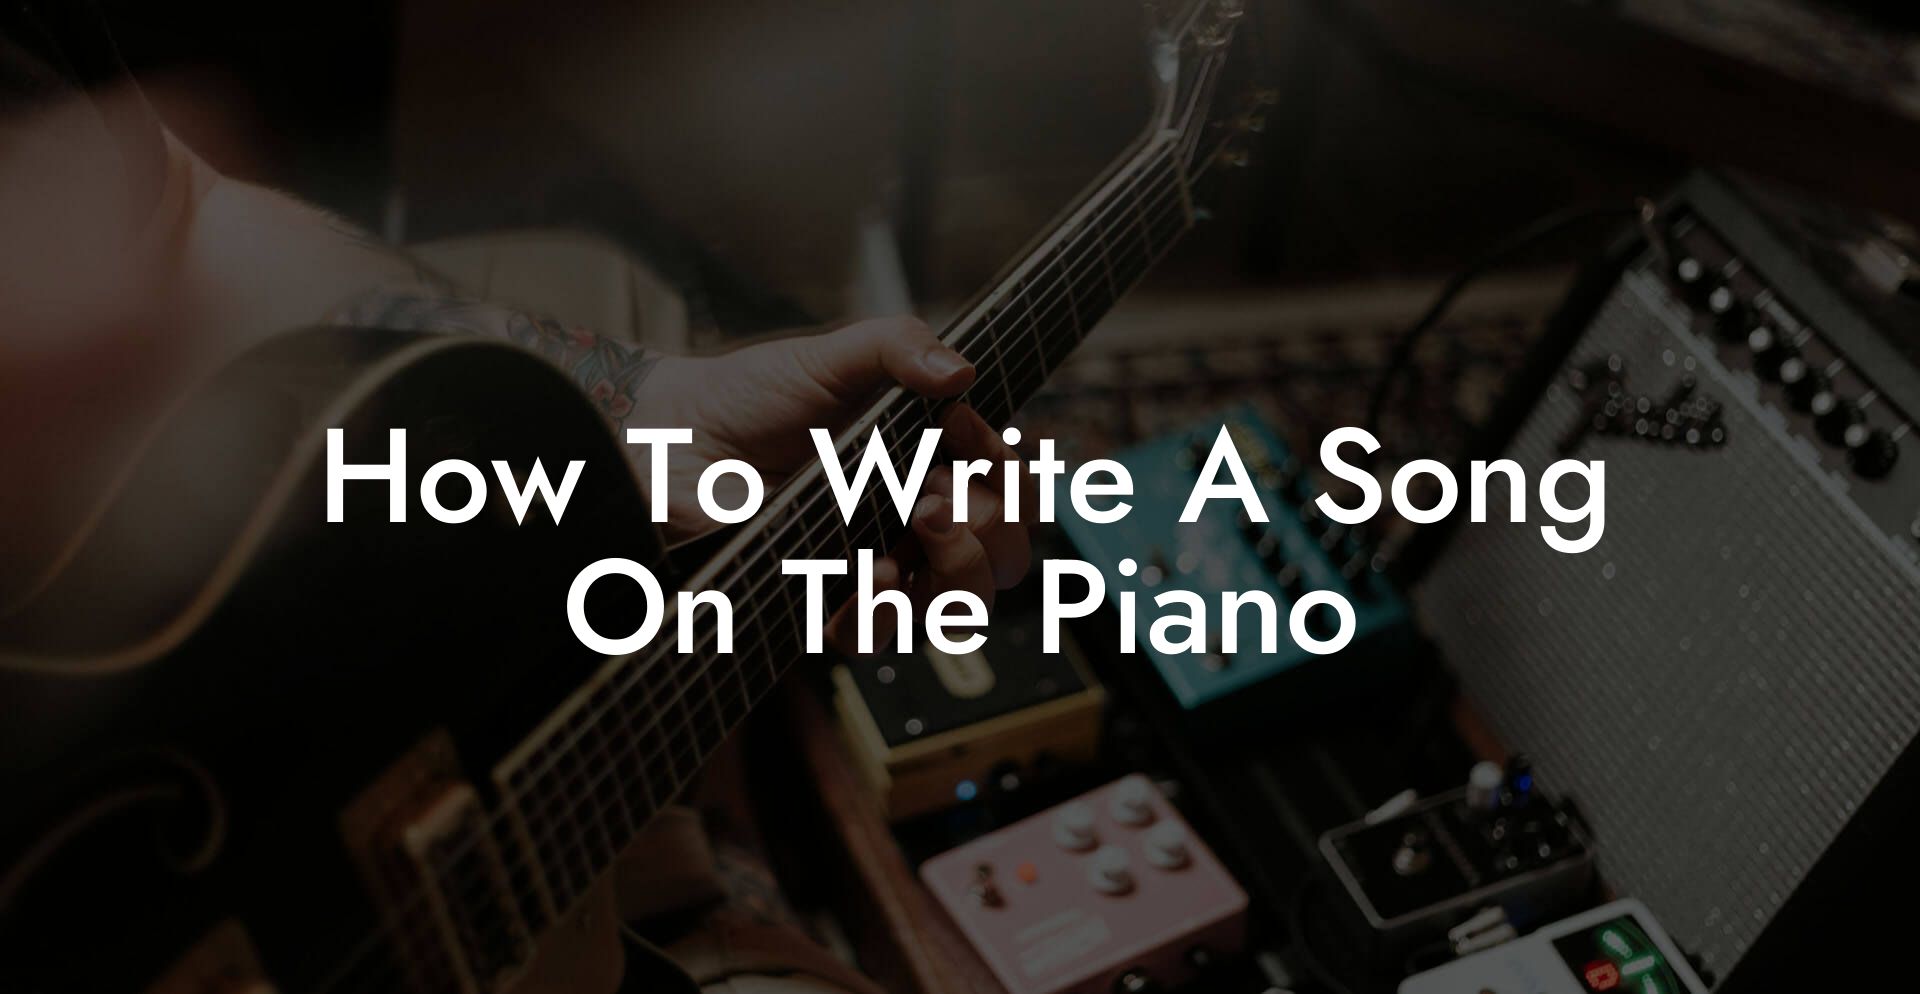 how to write a song on the piano lyric assistant